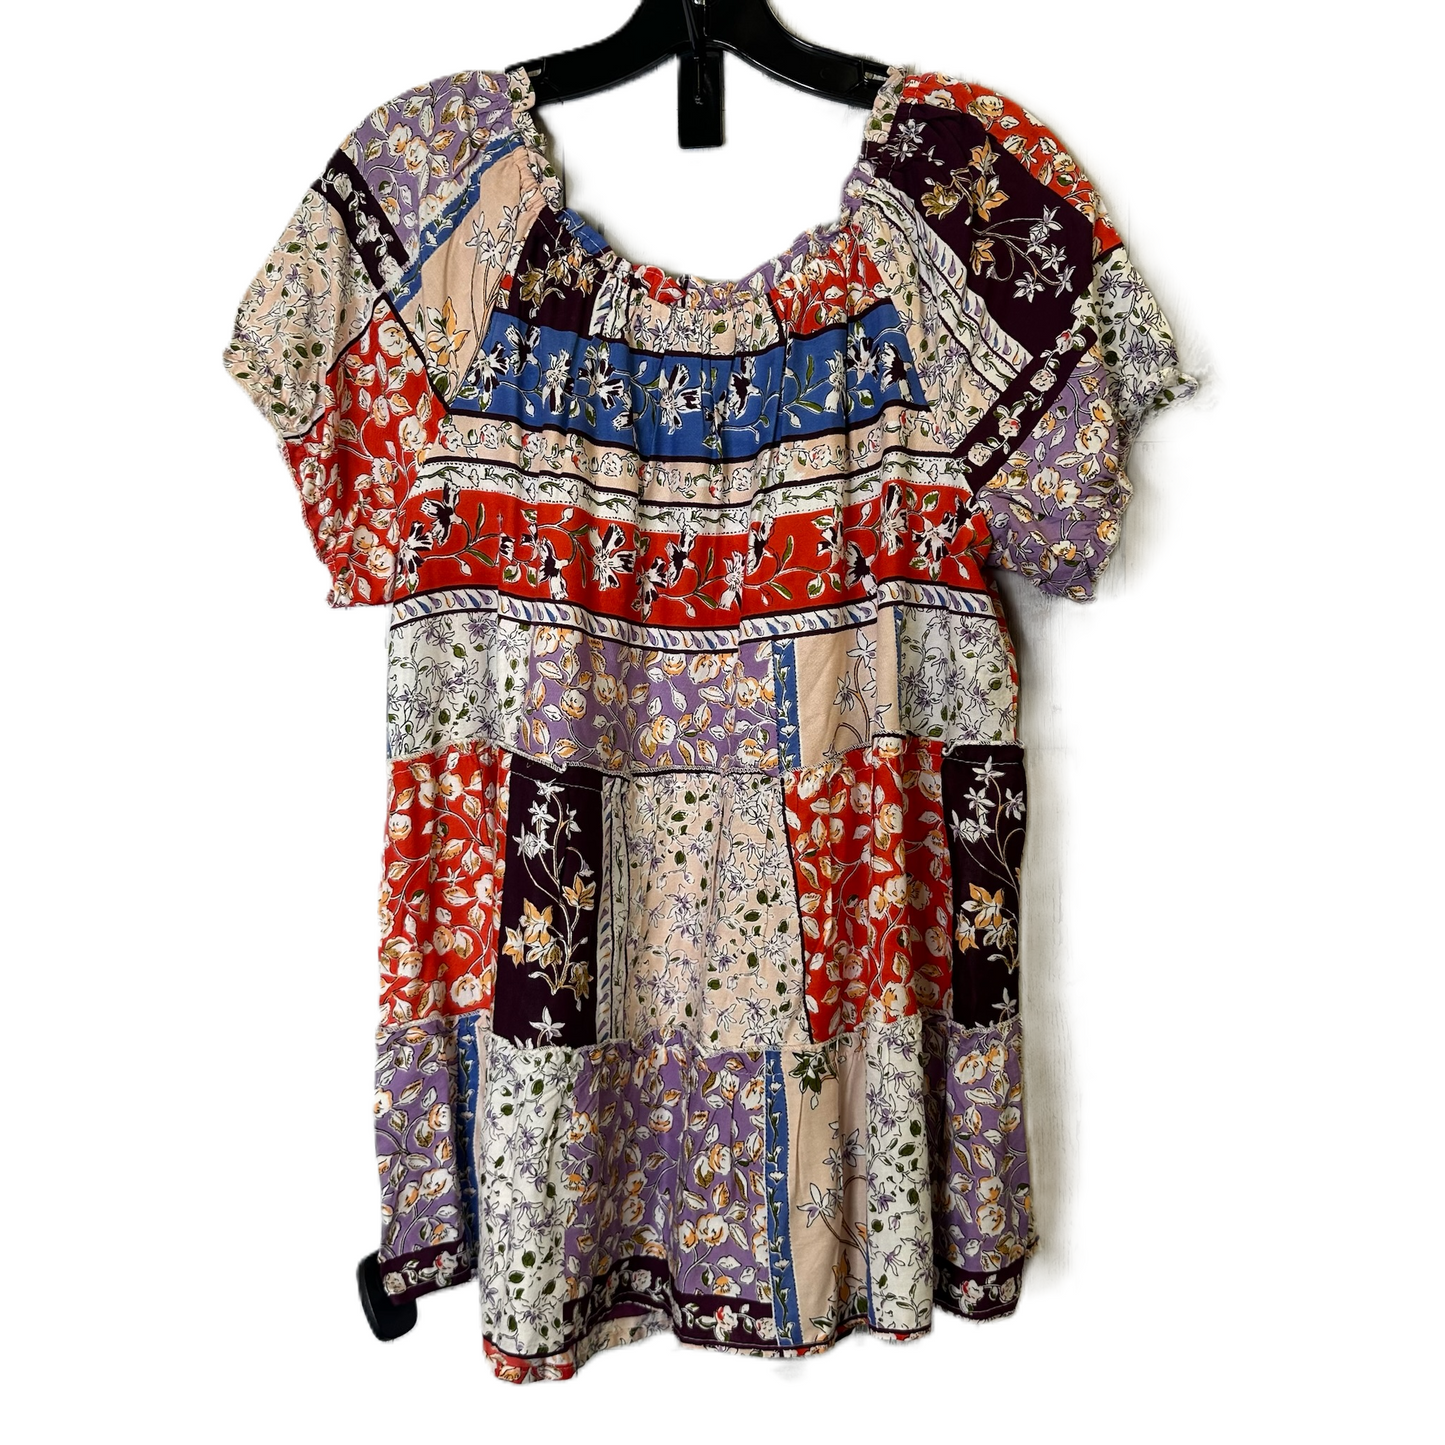 Floral Print Top Short Sleeve By Cato, Size: L